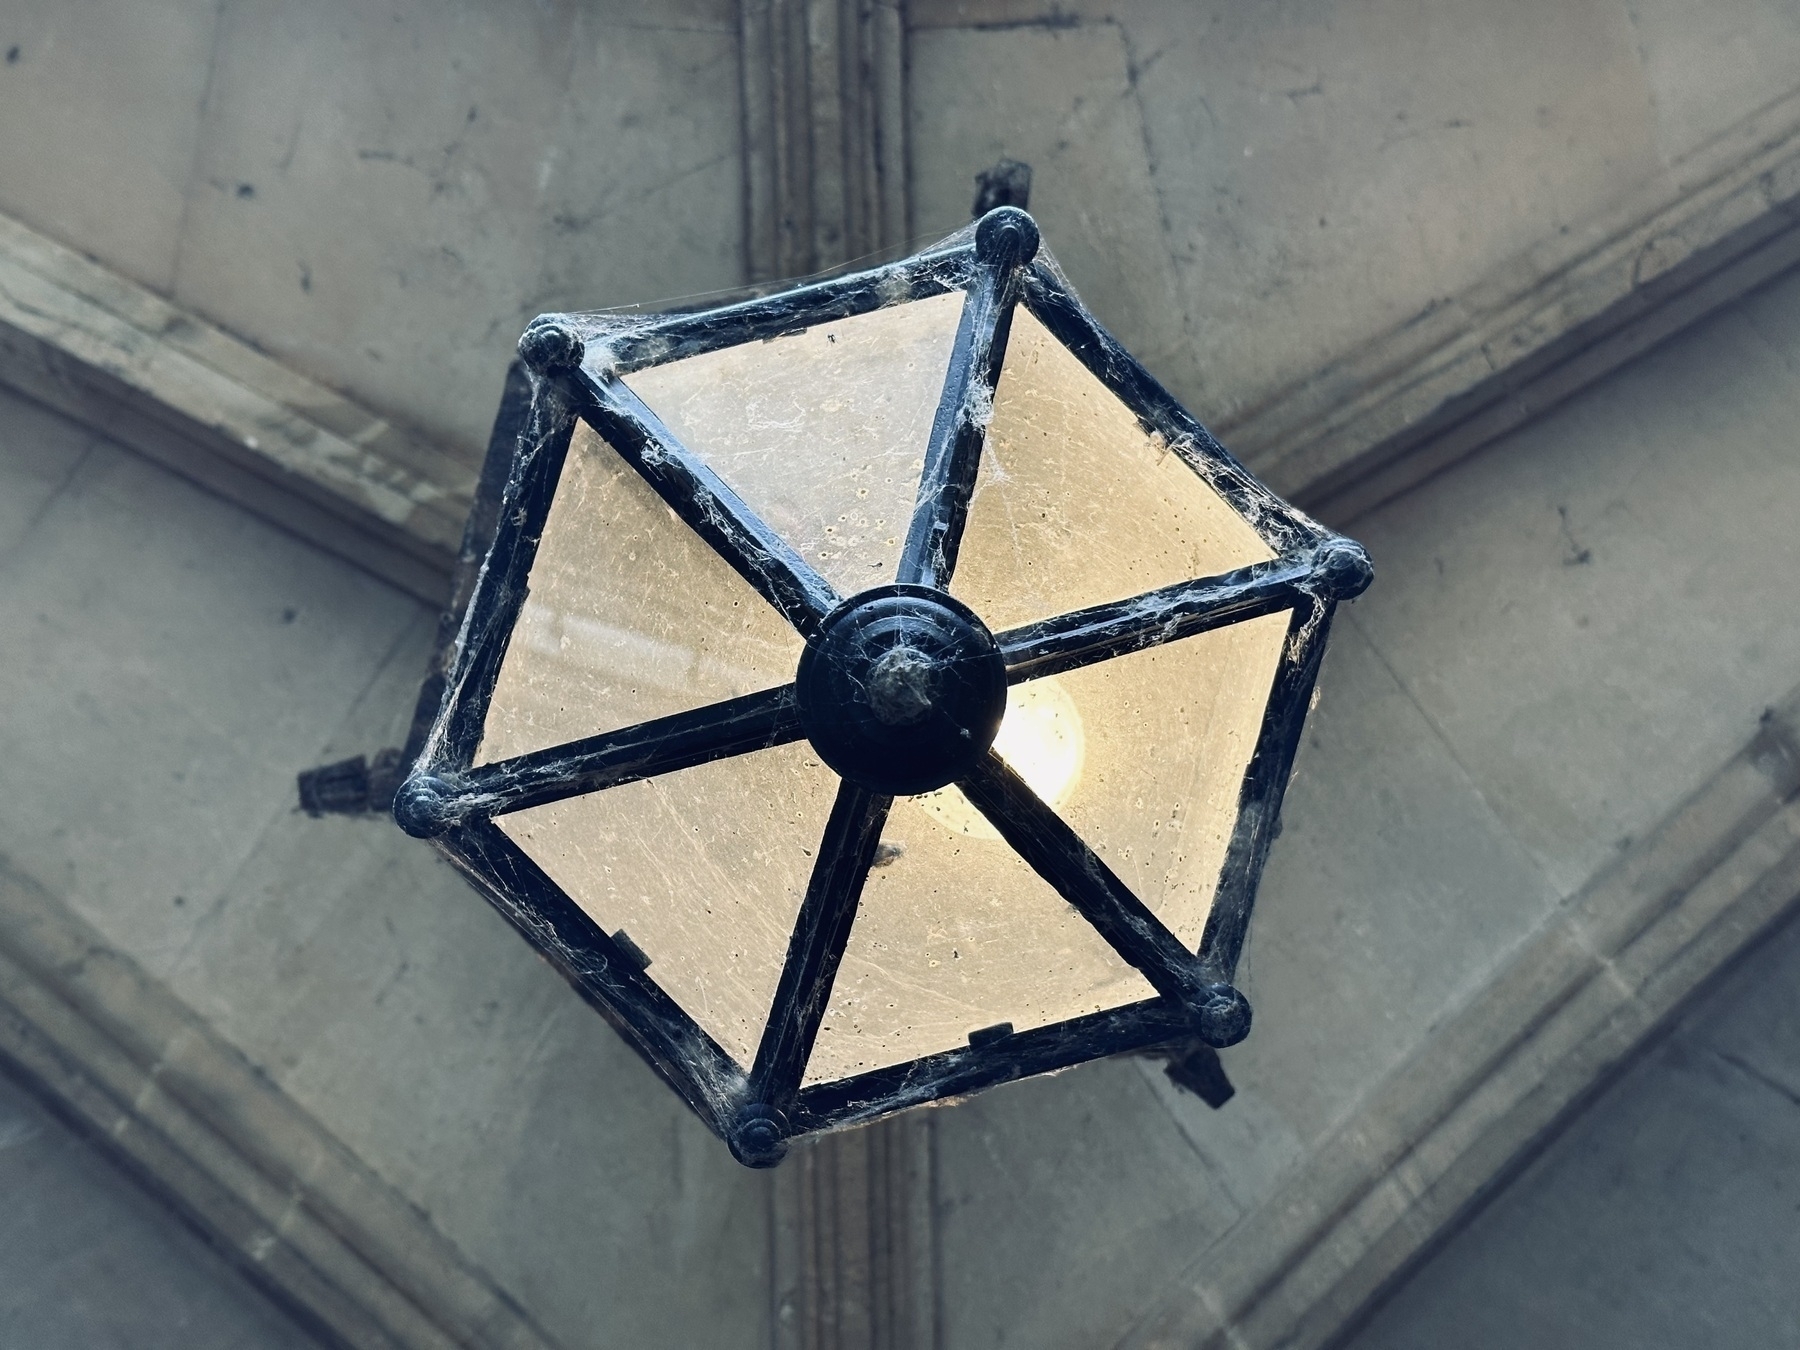 Looking directly up at a hexagonal metal framed lamp. The lamp has cobwebs around the edges, and is hanging from a vaulted stone ceiling.